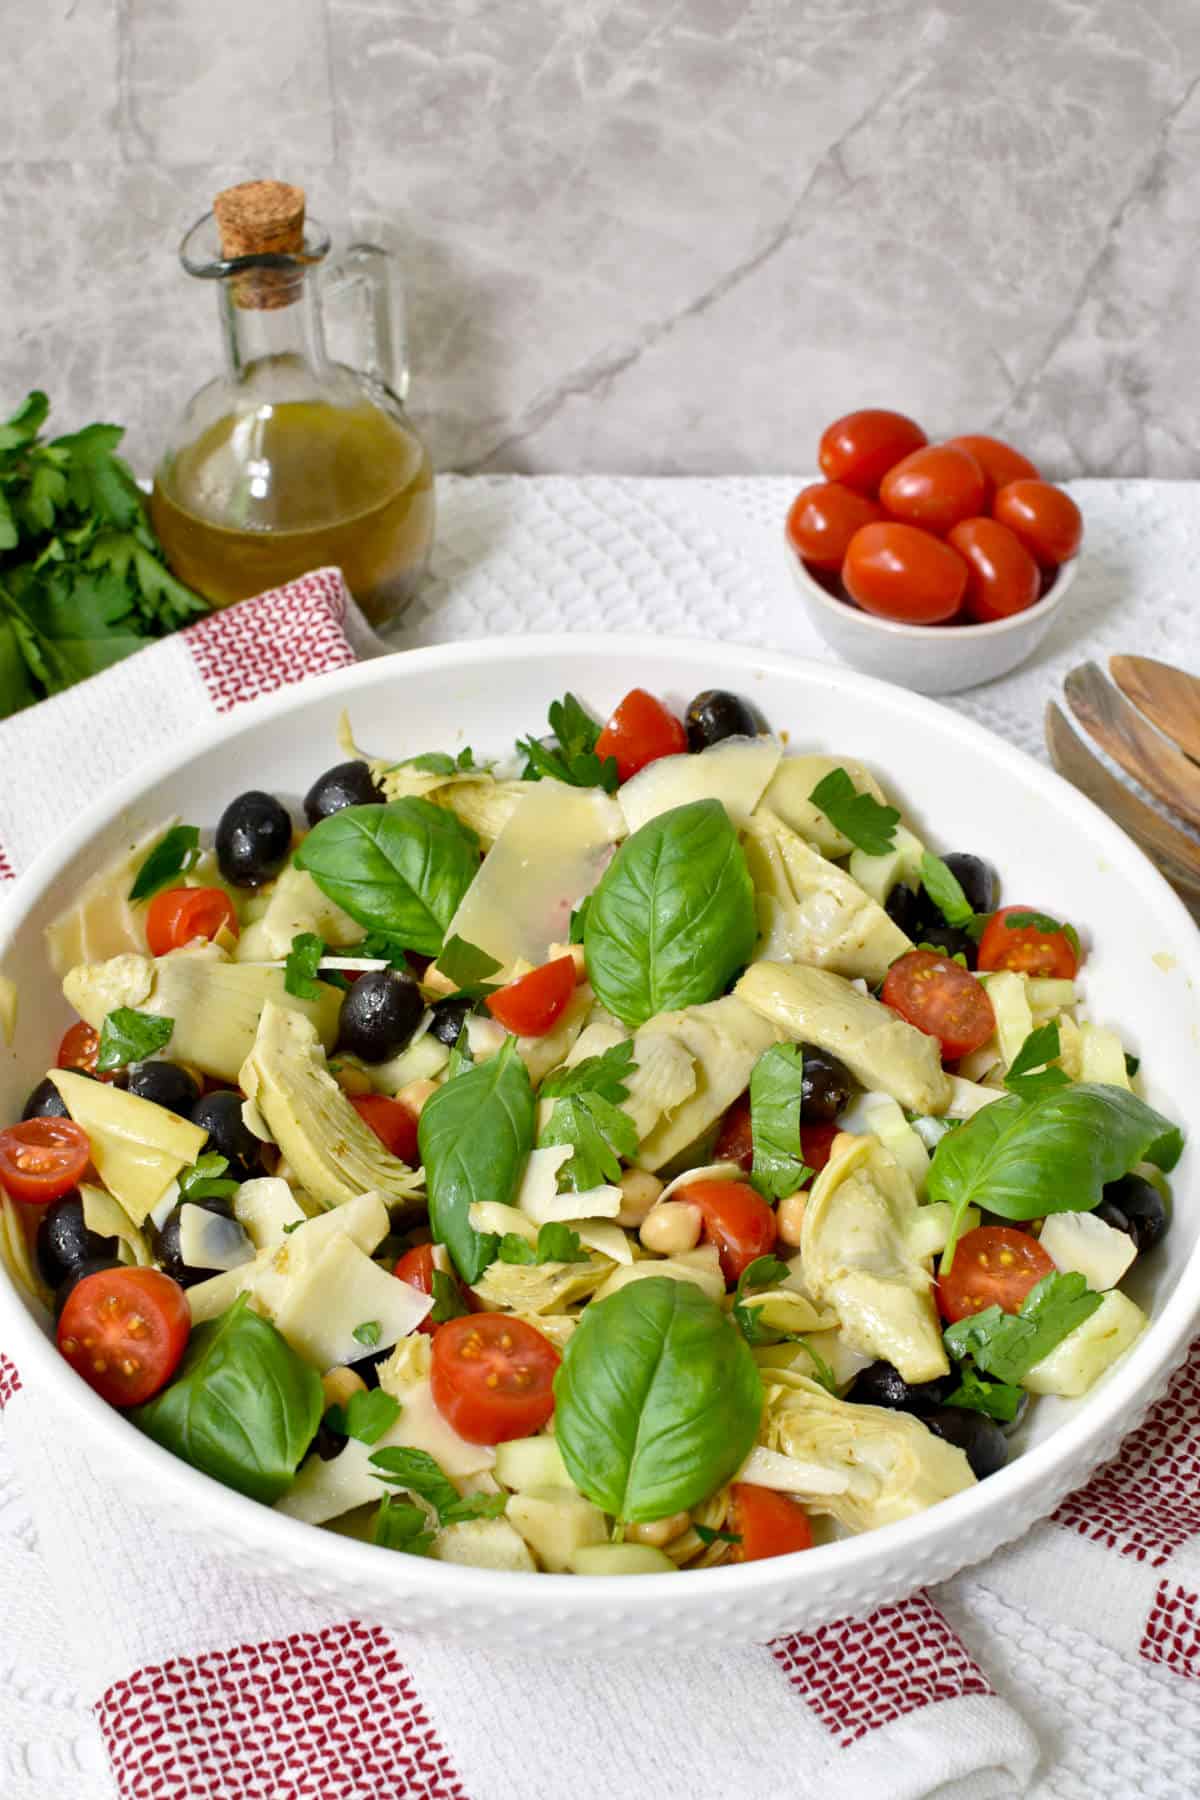 salad made with canned artichokes, black olives, tomatoes, cheese and basil leaves.